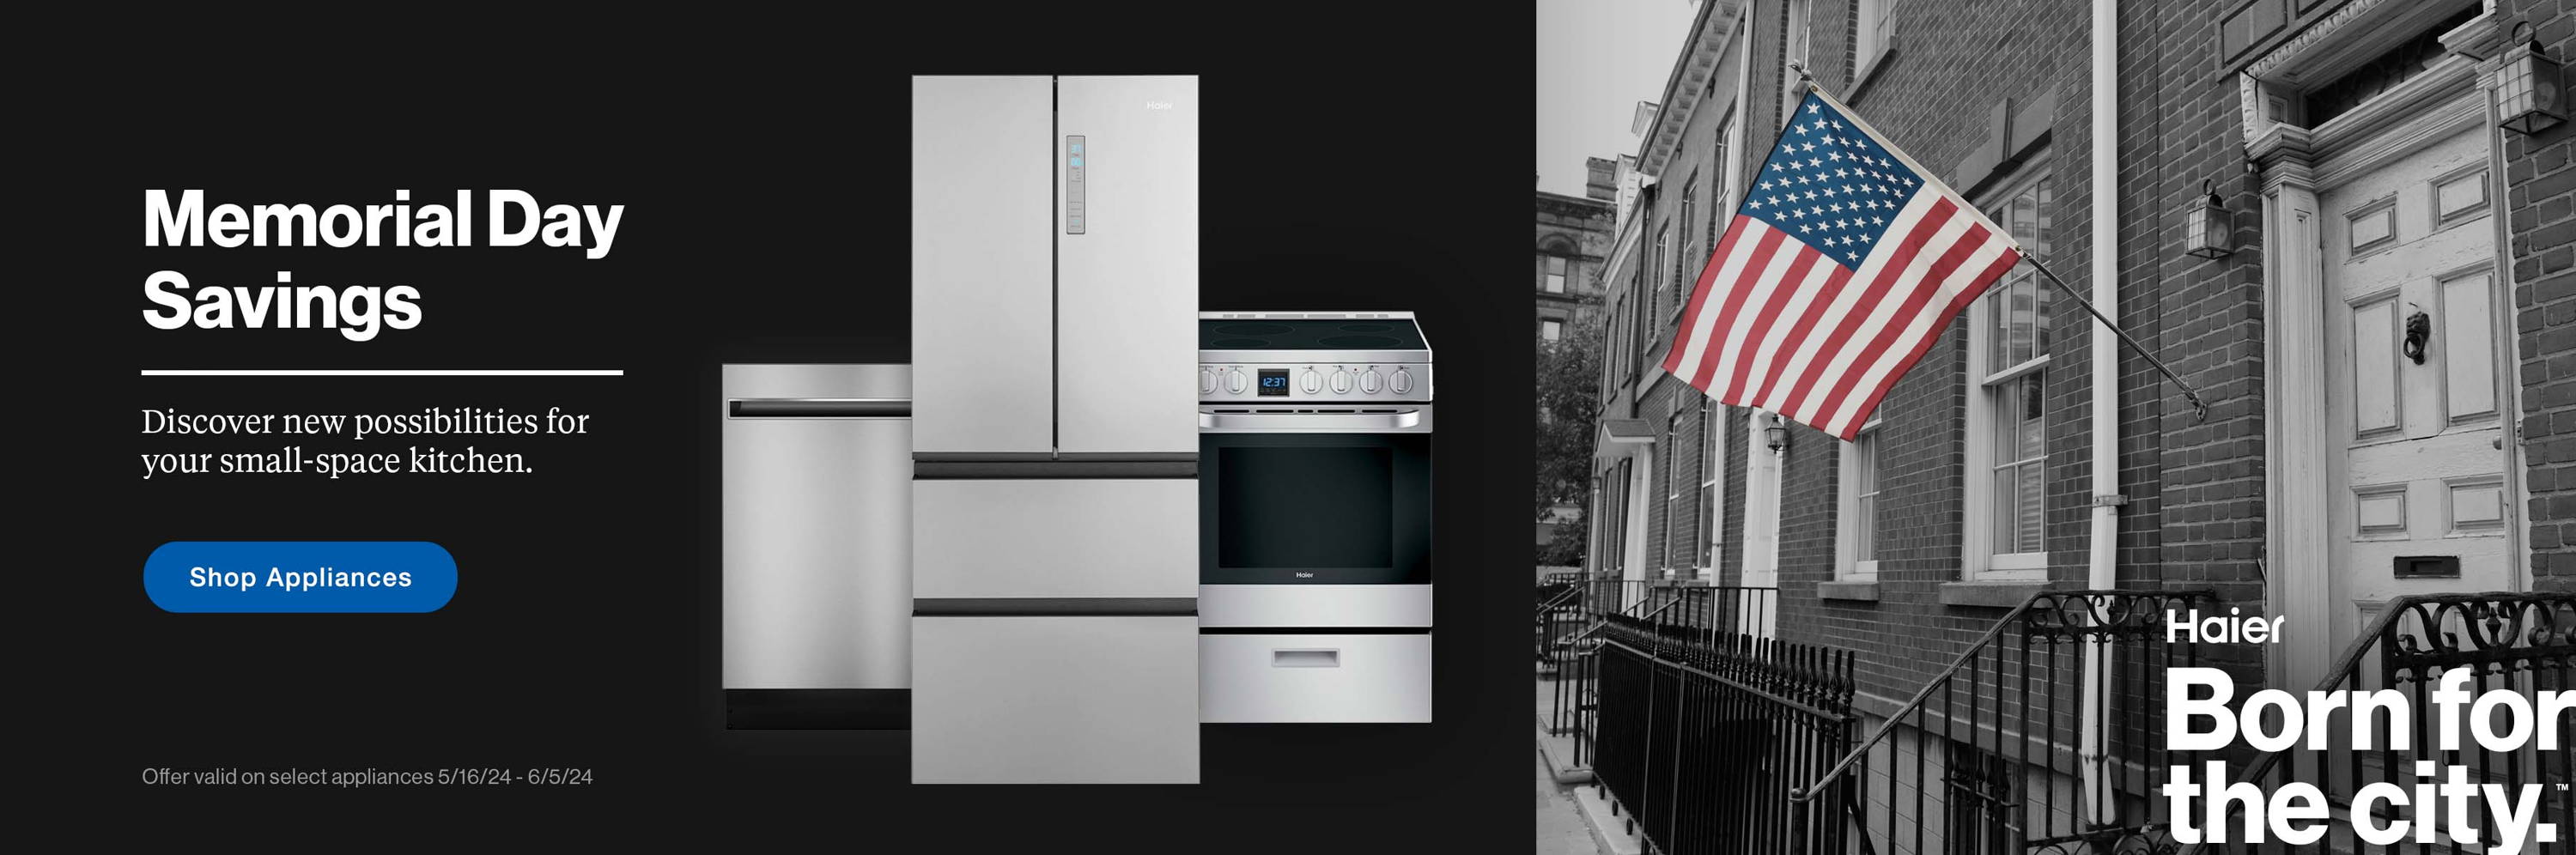 Memorial Day Savings. Discover new possibilities for your small-space kitchen. Save up to 35% off.American flag on a building in Brooklyn in New York, USA